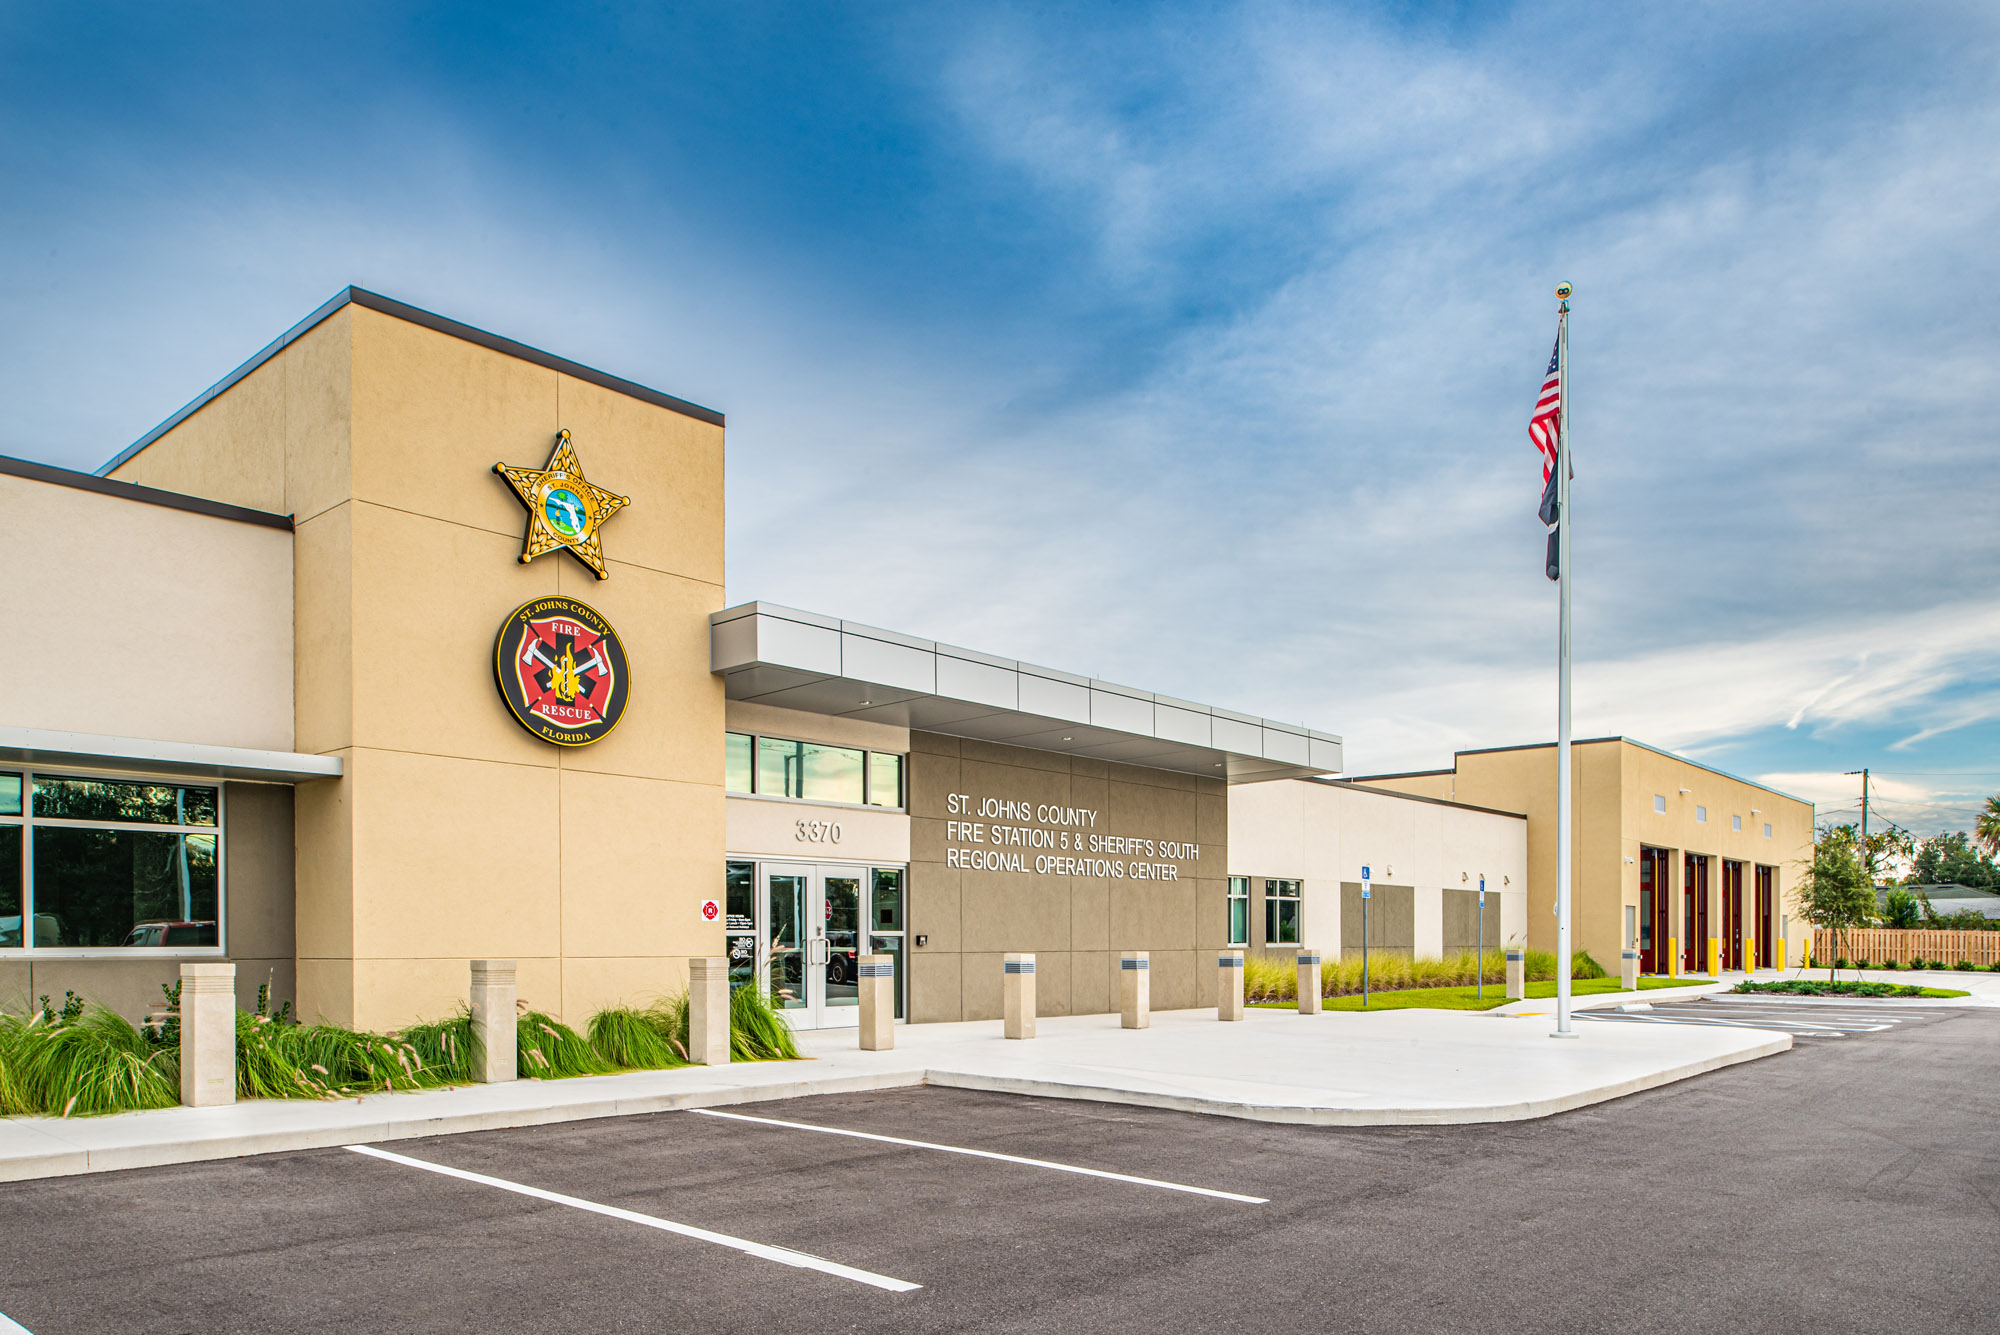 St. Johns County Fire Station No. 5 and Sheriff South Command